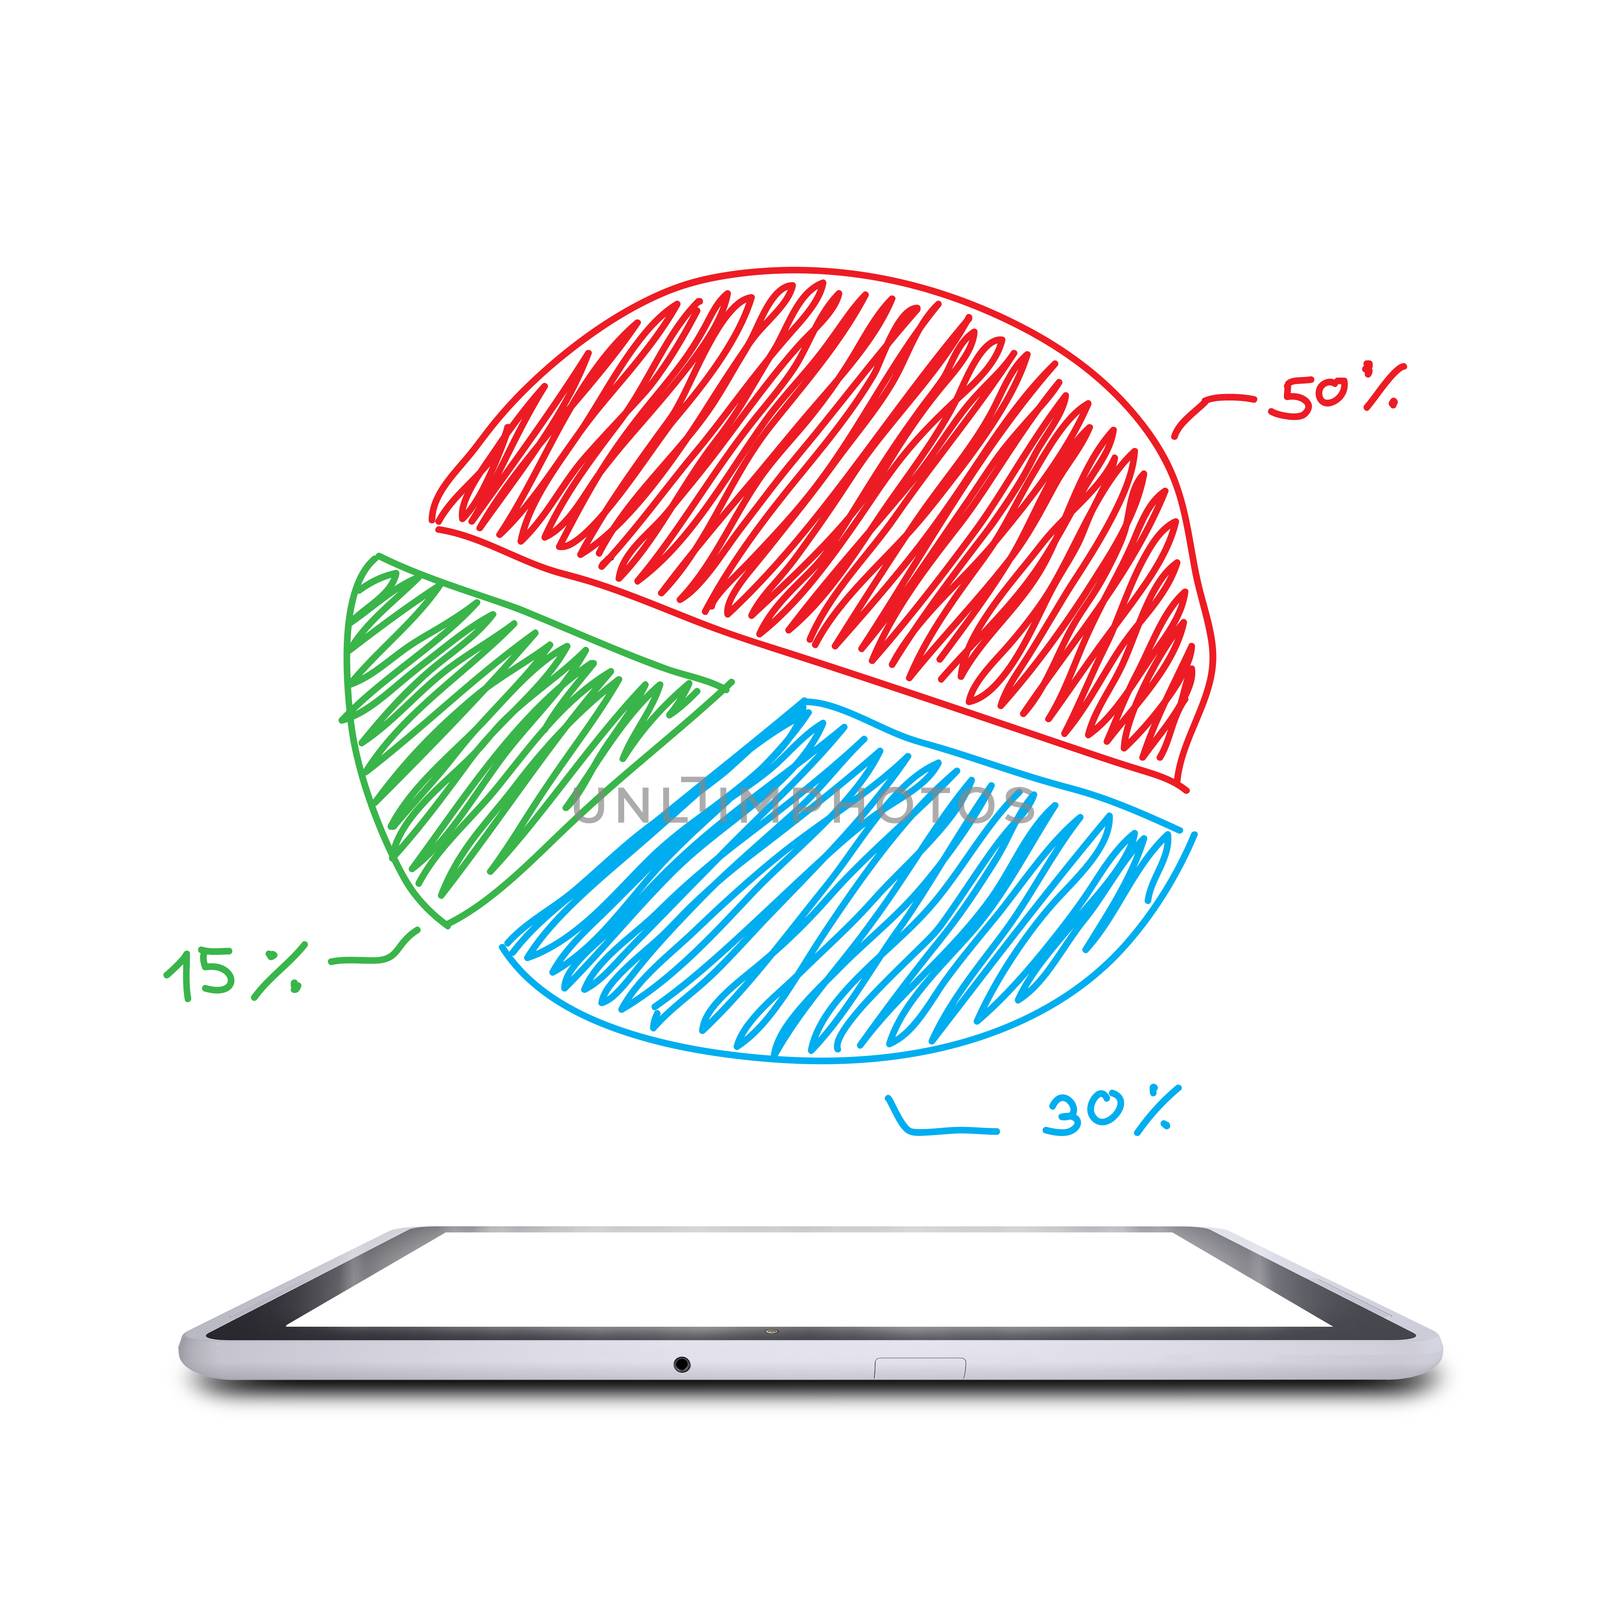 On the screen of the tablet is a pie chart by cherezoff